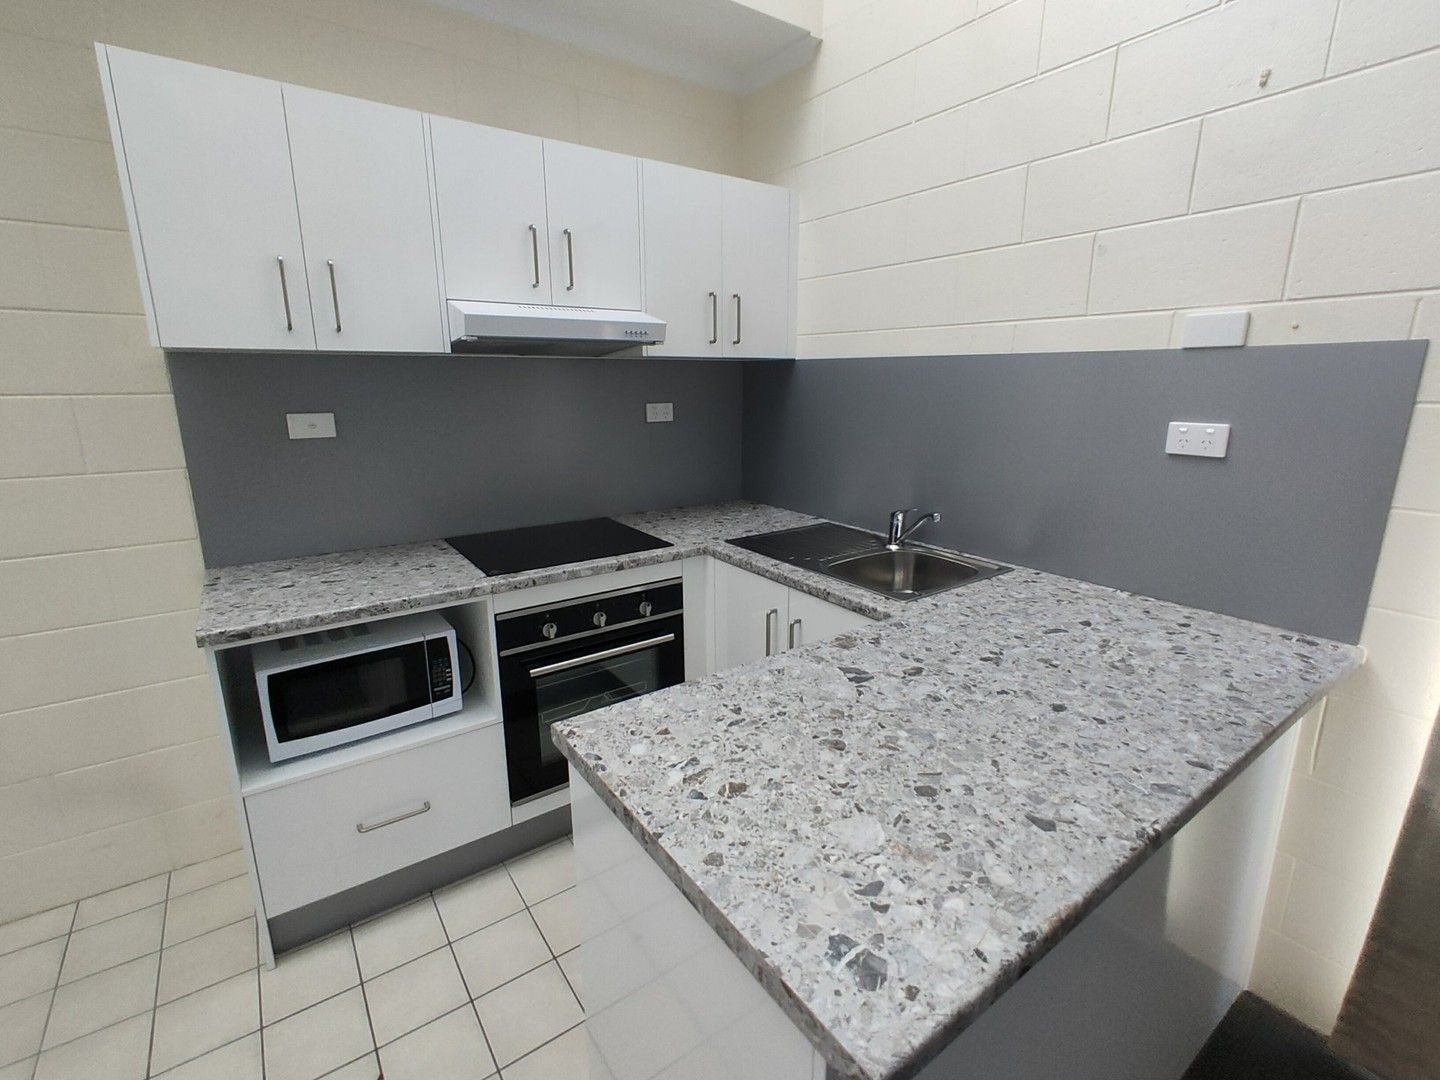 2 bedrooms Apartment / Unit / Flat in 1/27 Brooks Street WHITFIELD QLD, 4870